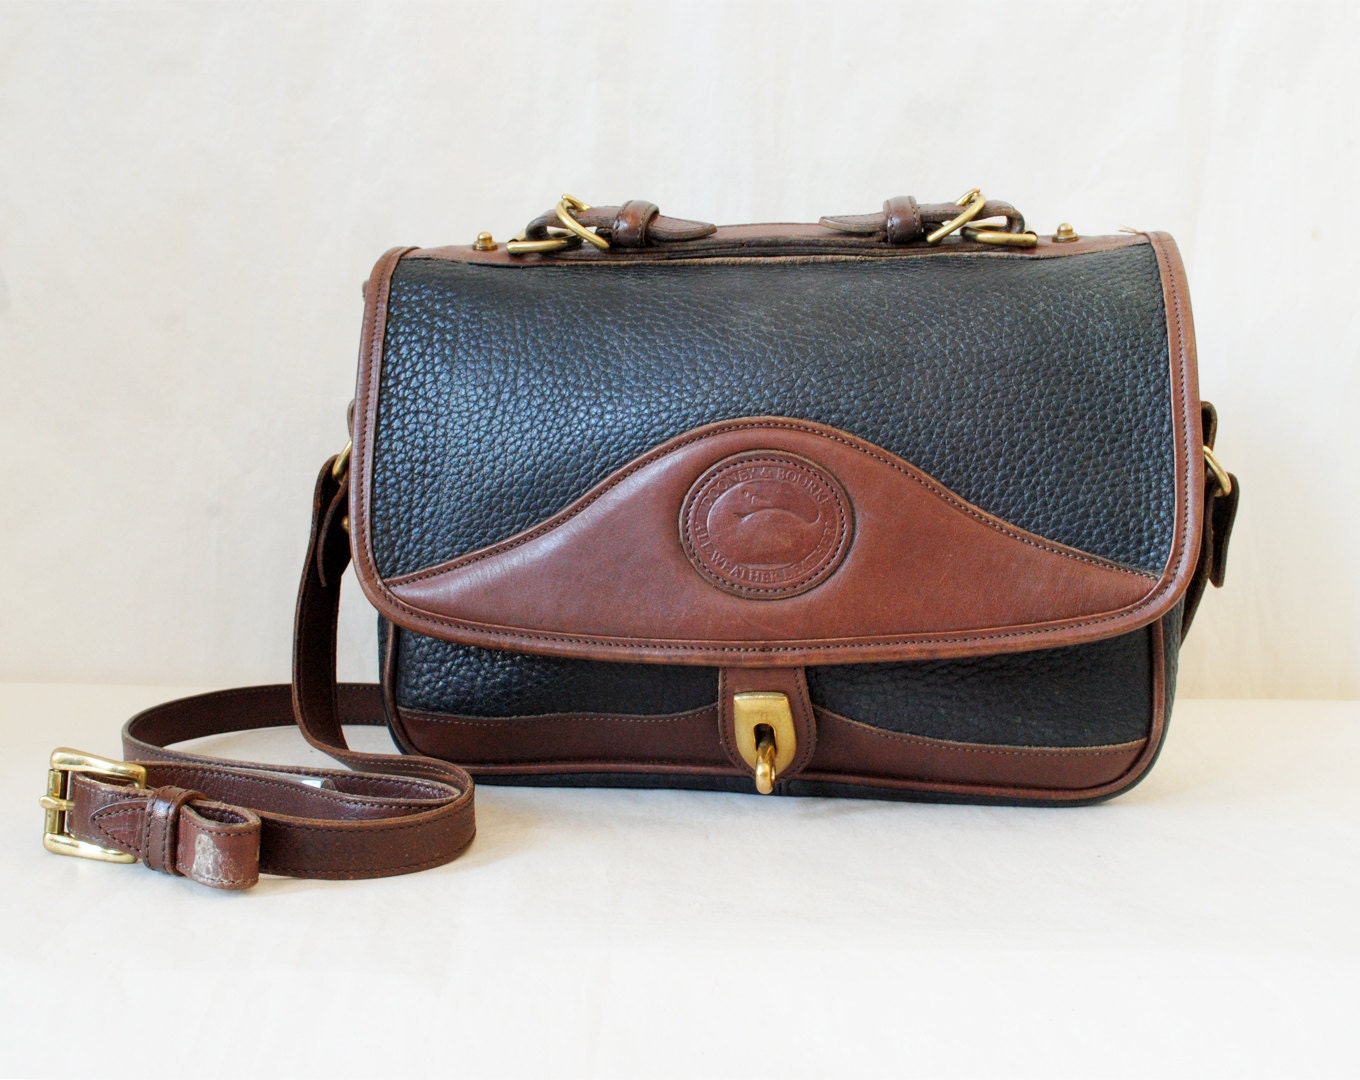 Vintage Dooney and Bourke Purse Black and Brown Crossbody